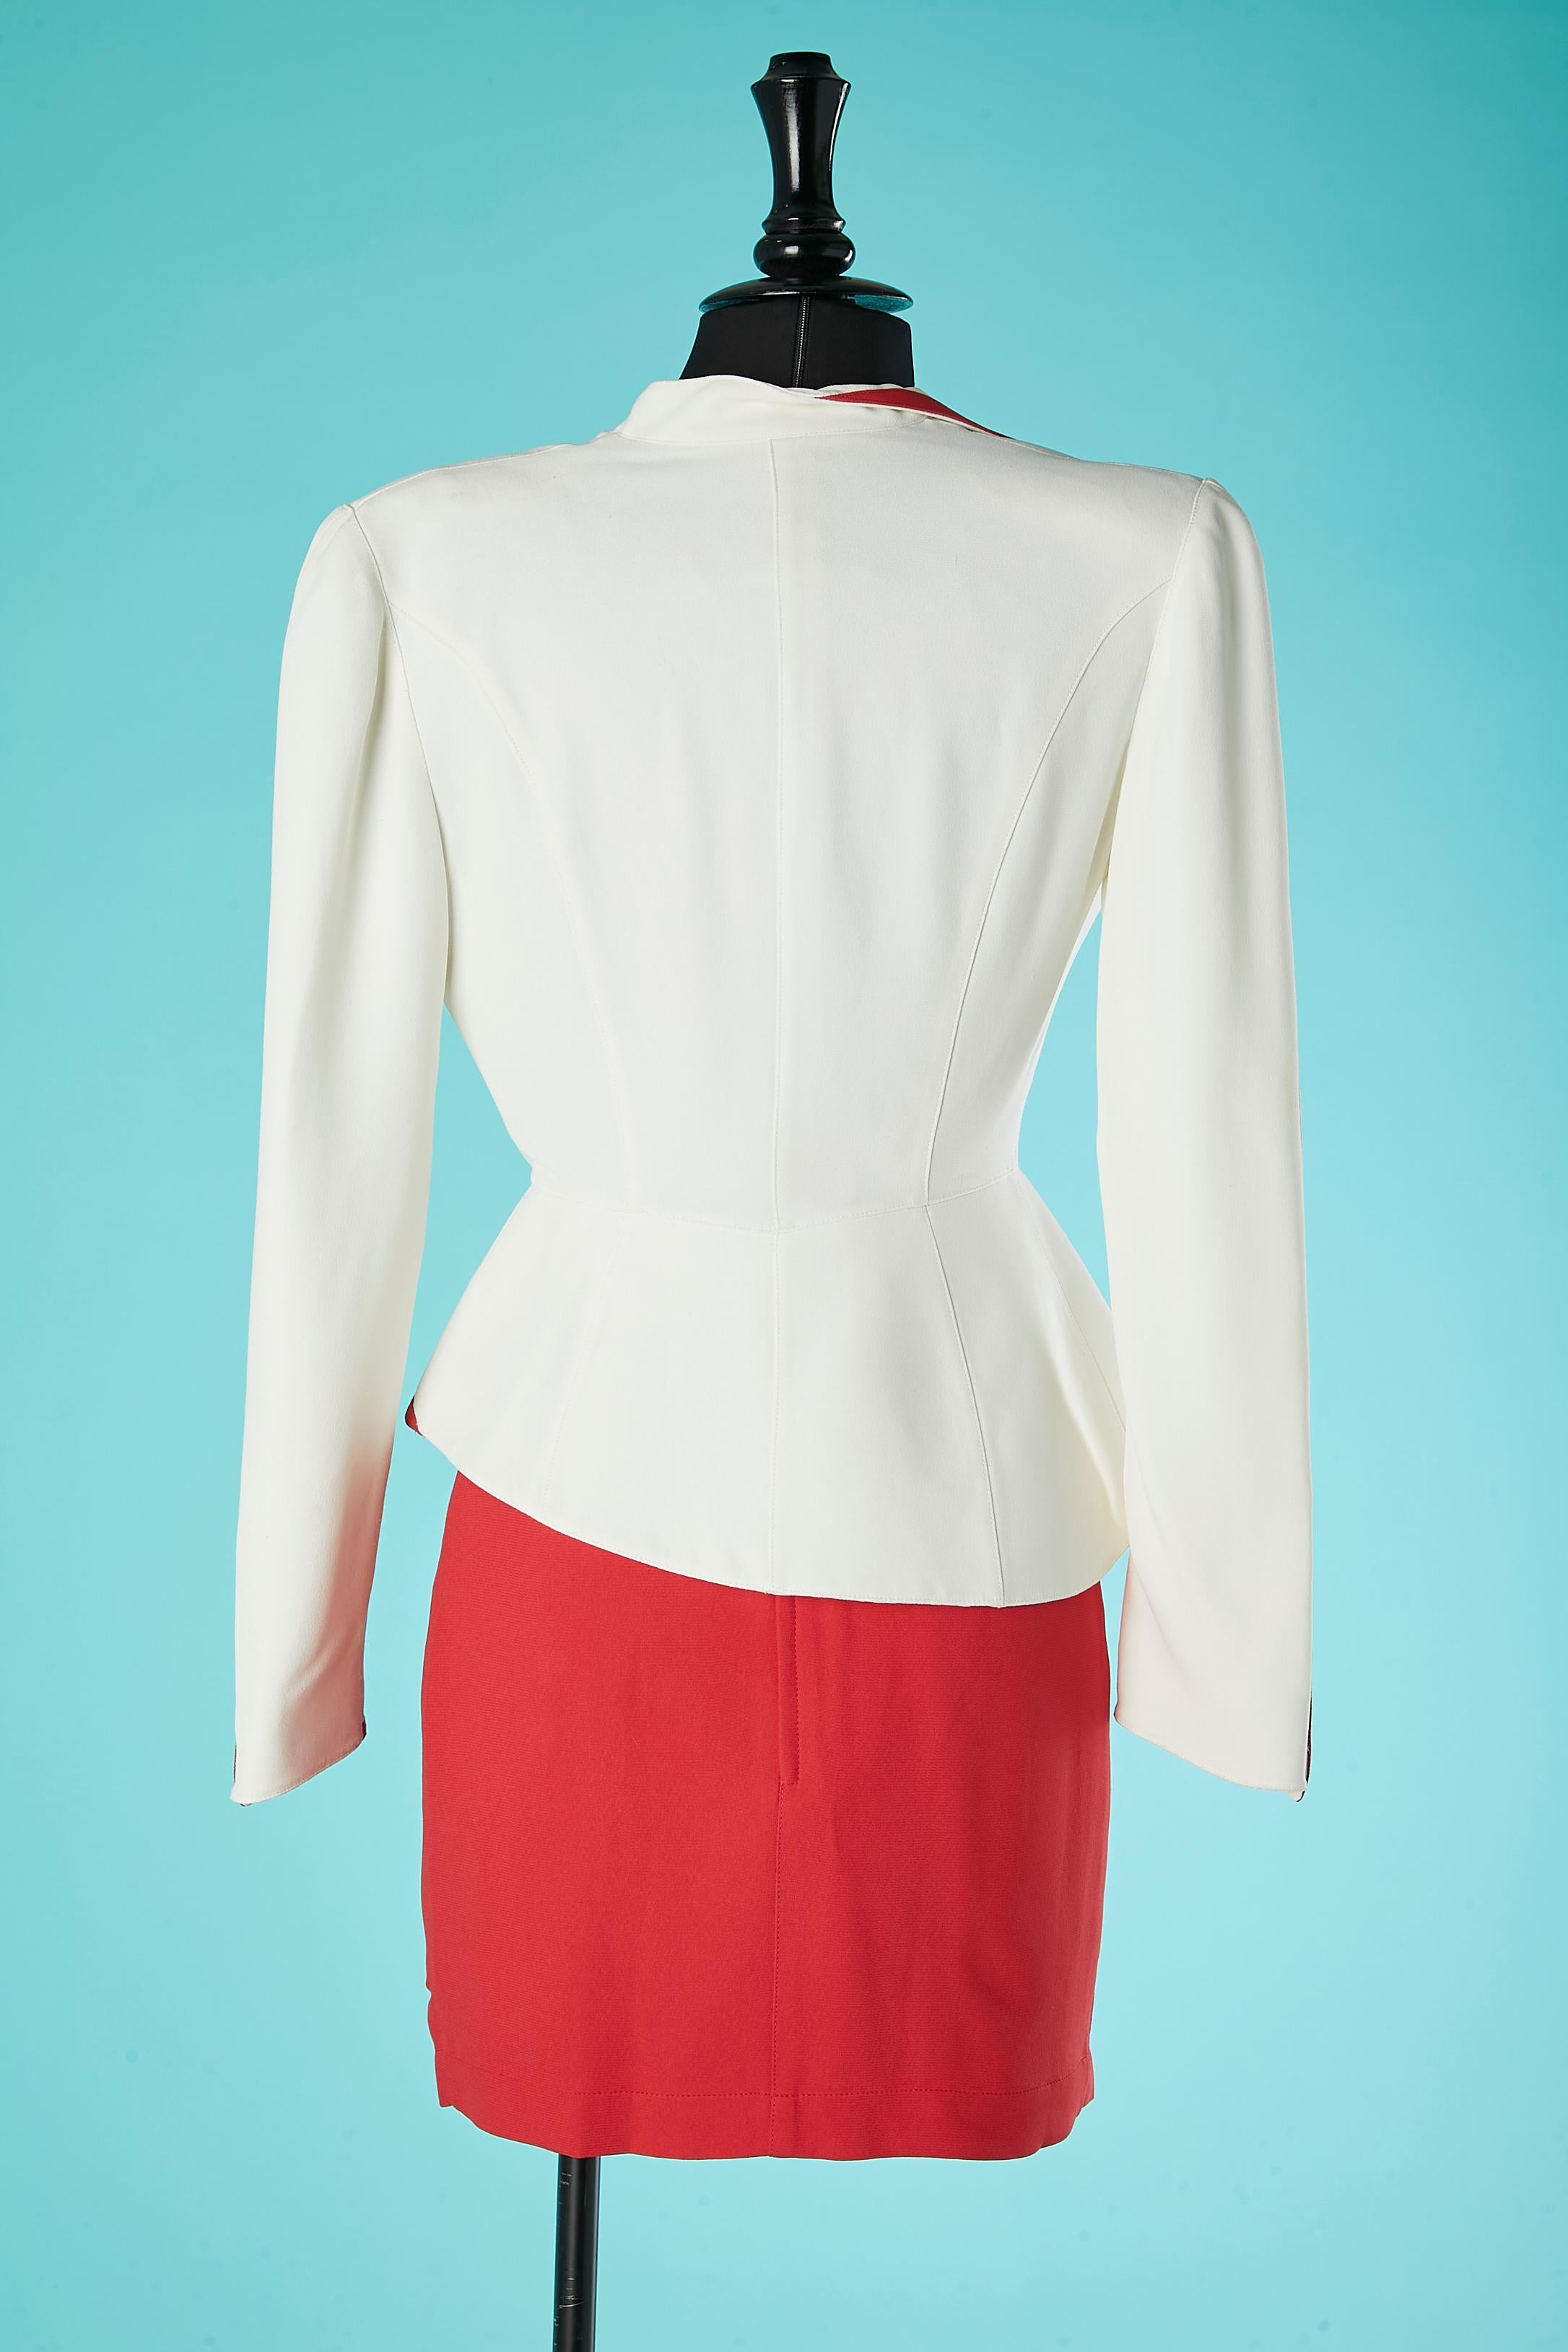 Asymmetrical ivory skirt-suit with red details and red skirt Thierry Mugler  For Sale 2